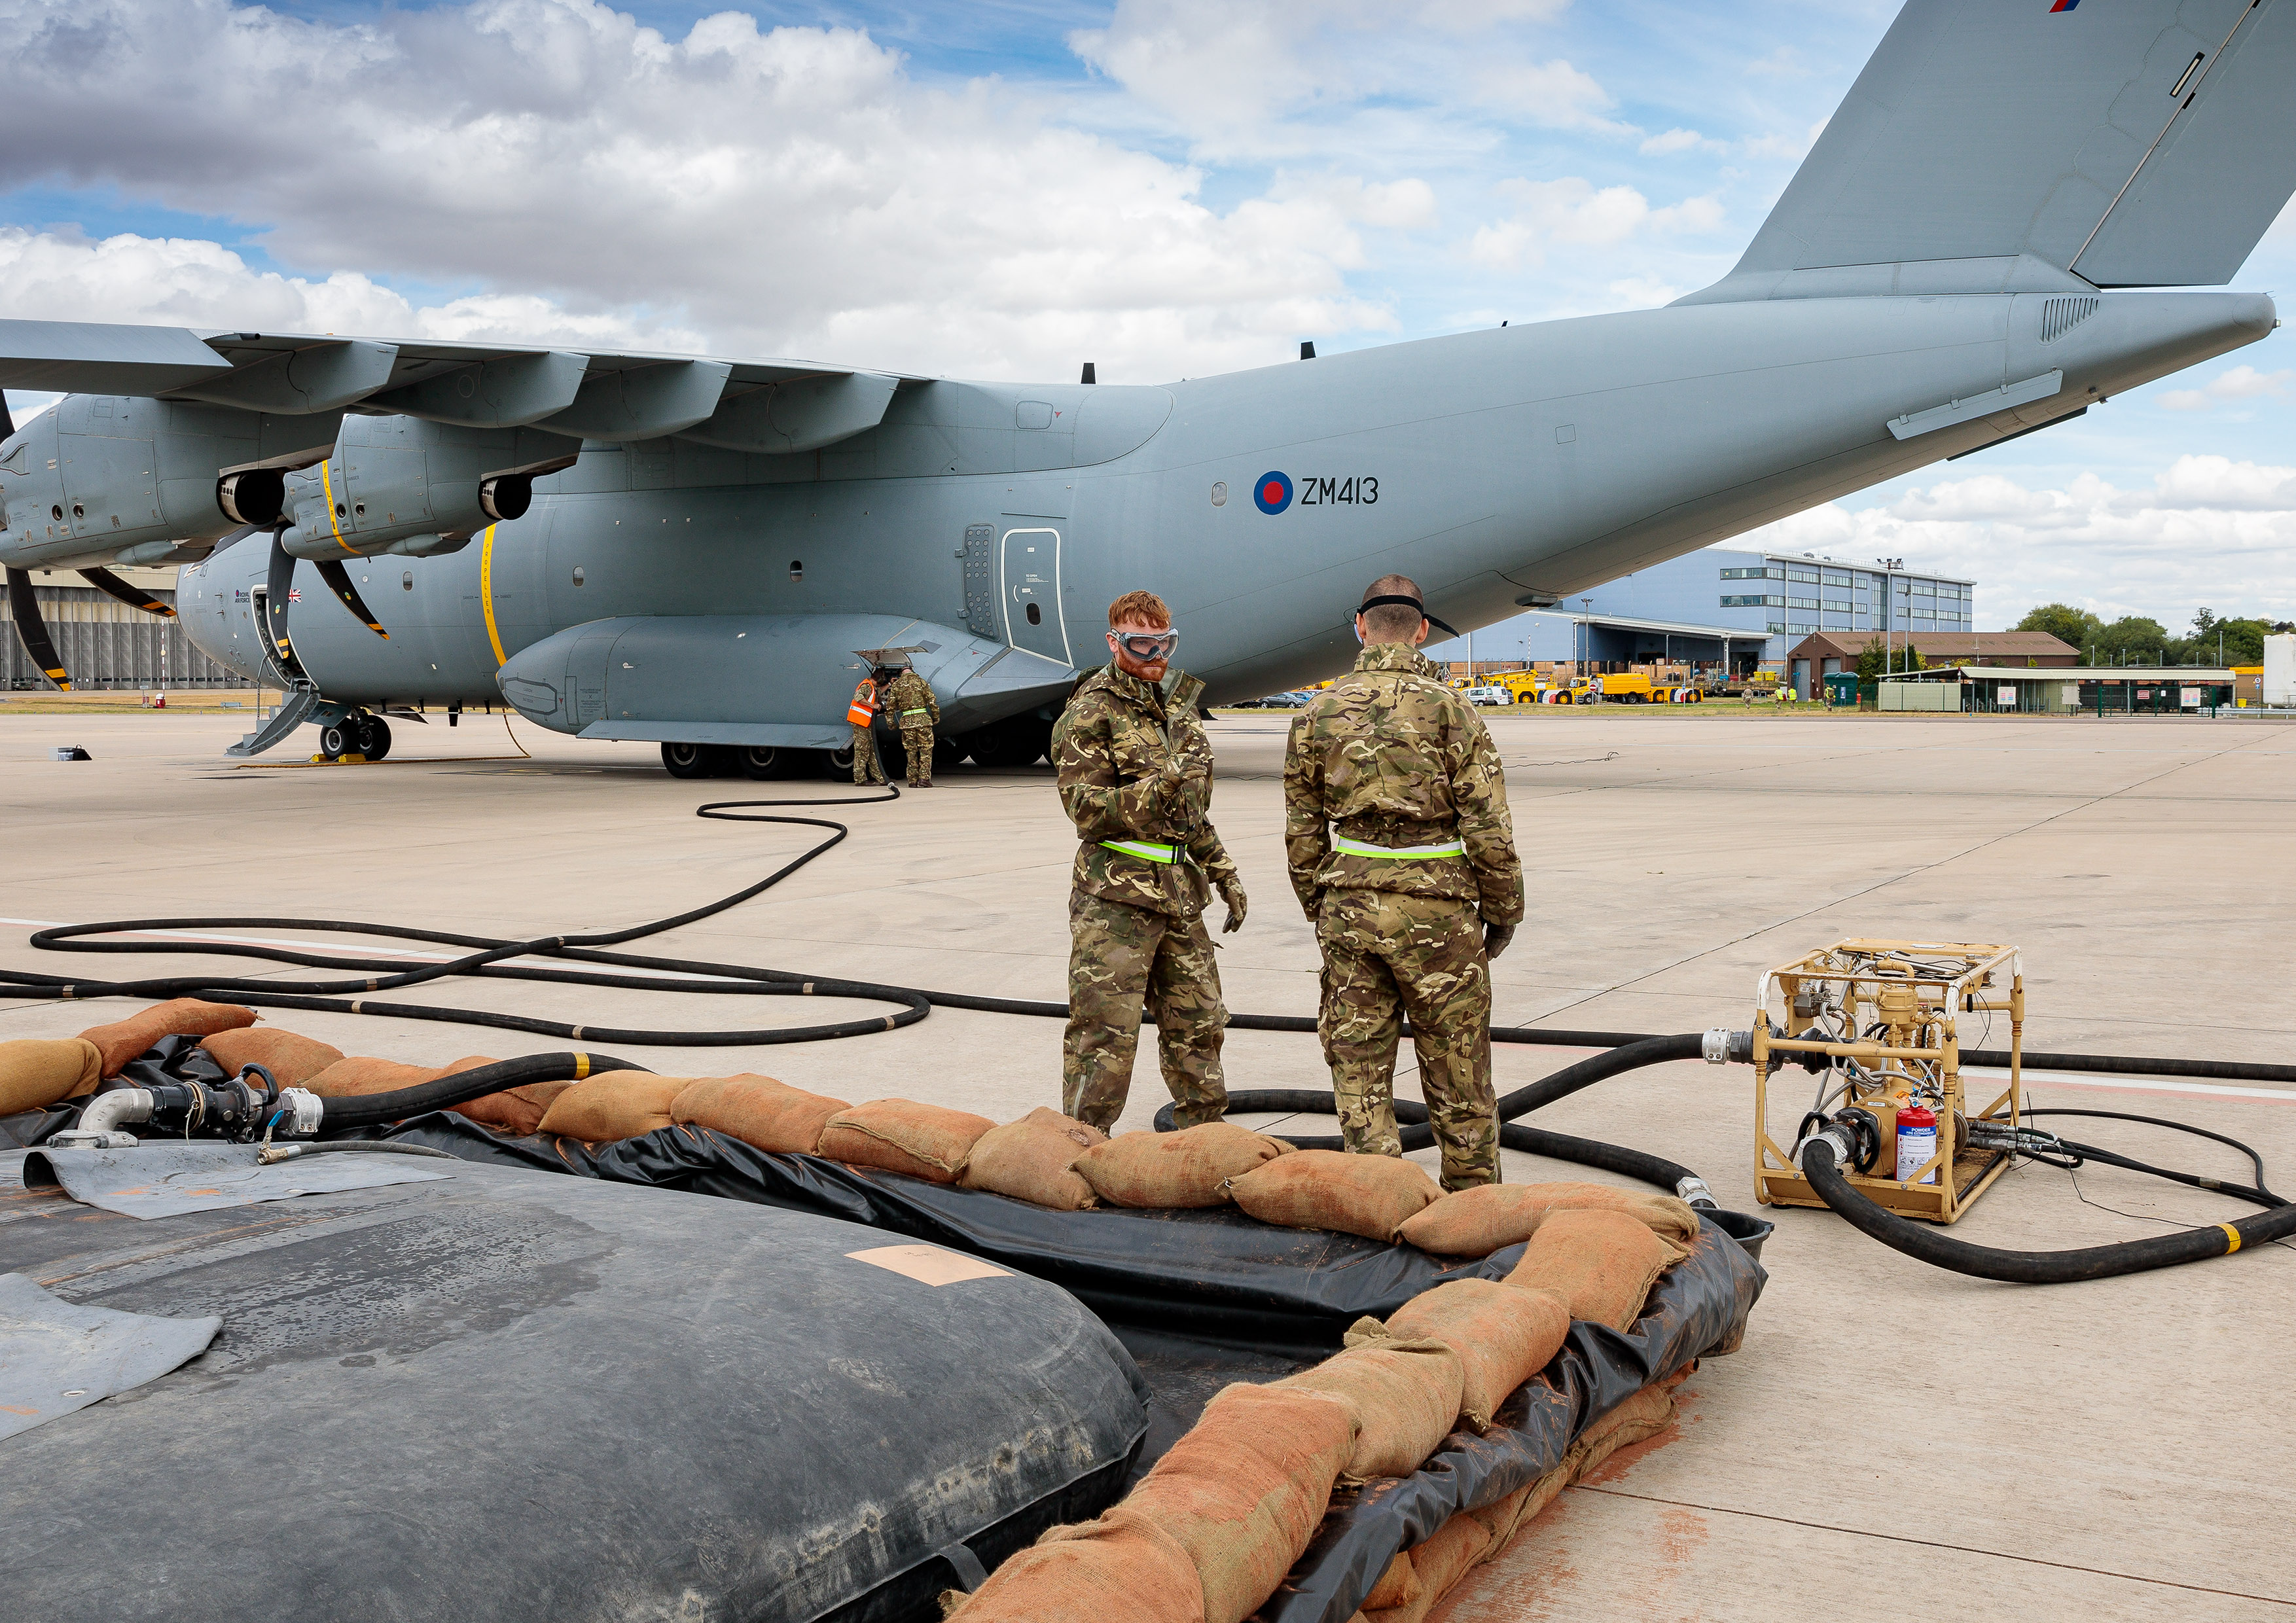 Image shows RAF aviators standing by spill kit barrier with Hercules aircraft in background. 